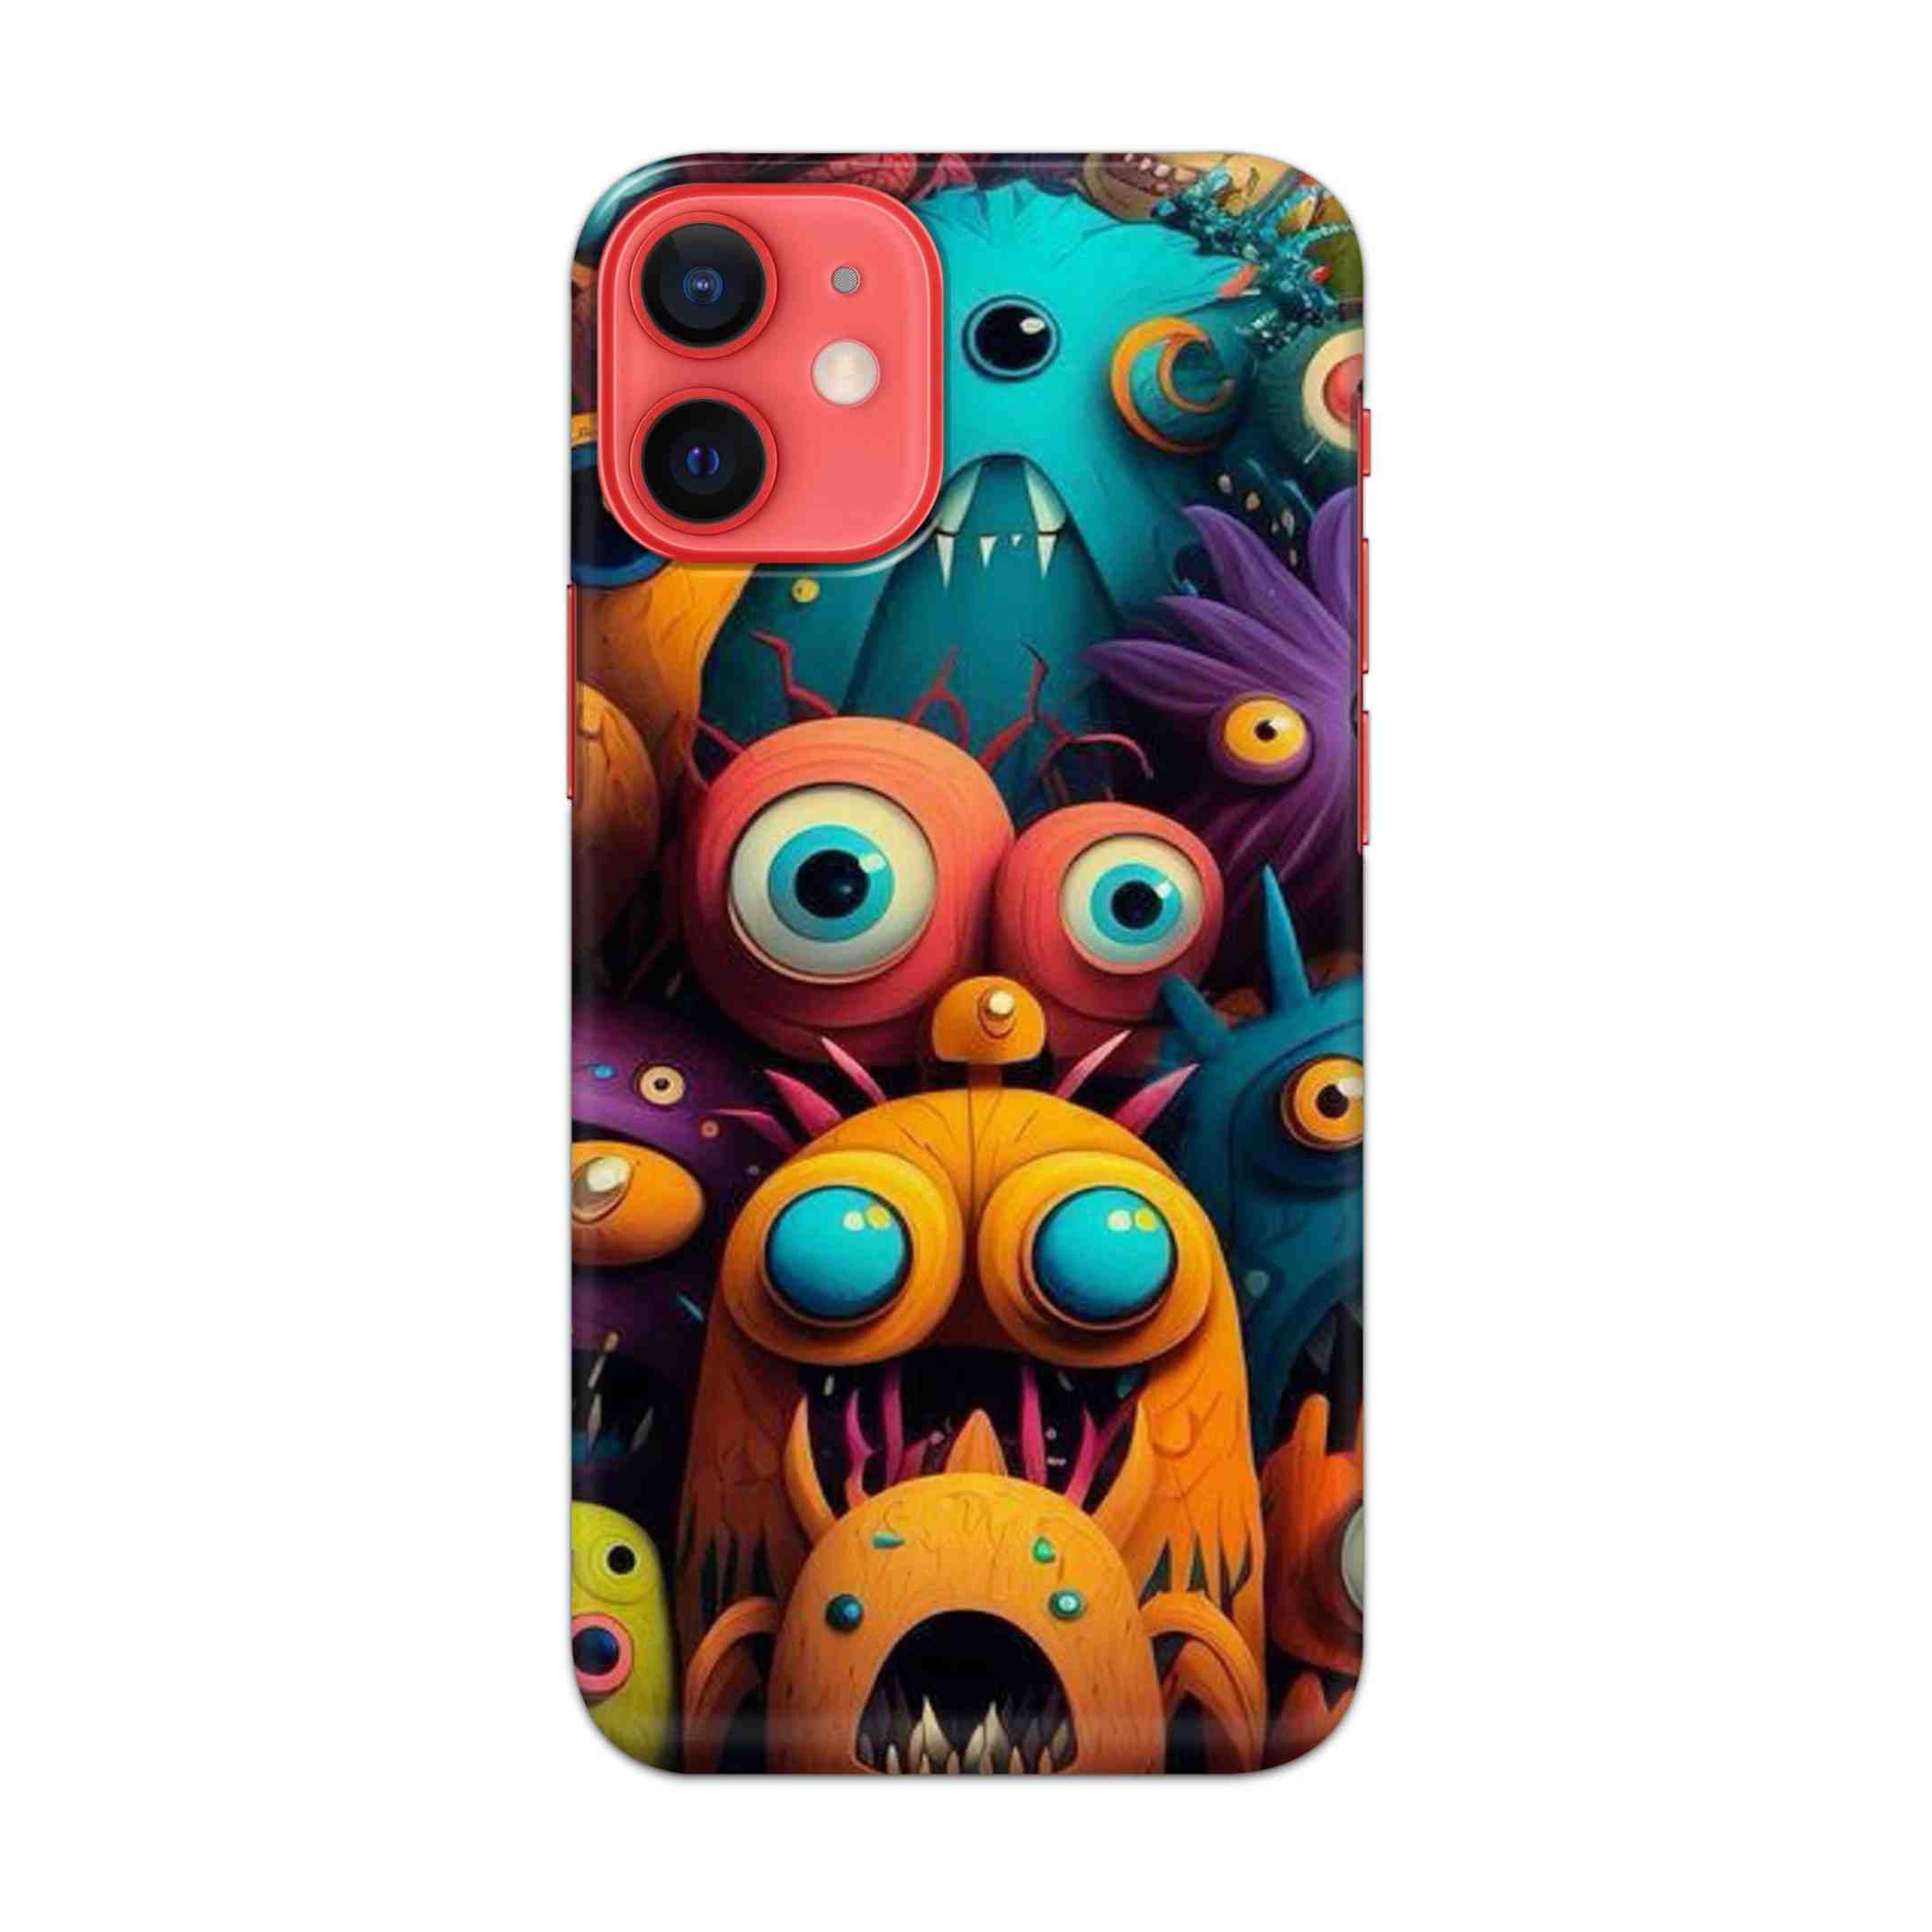 Buy Zombie Hard Back Mobile Phone Case/Cover For Apple iPhone 12 mini Online